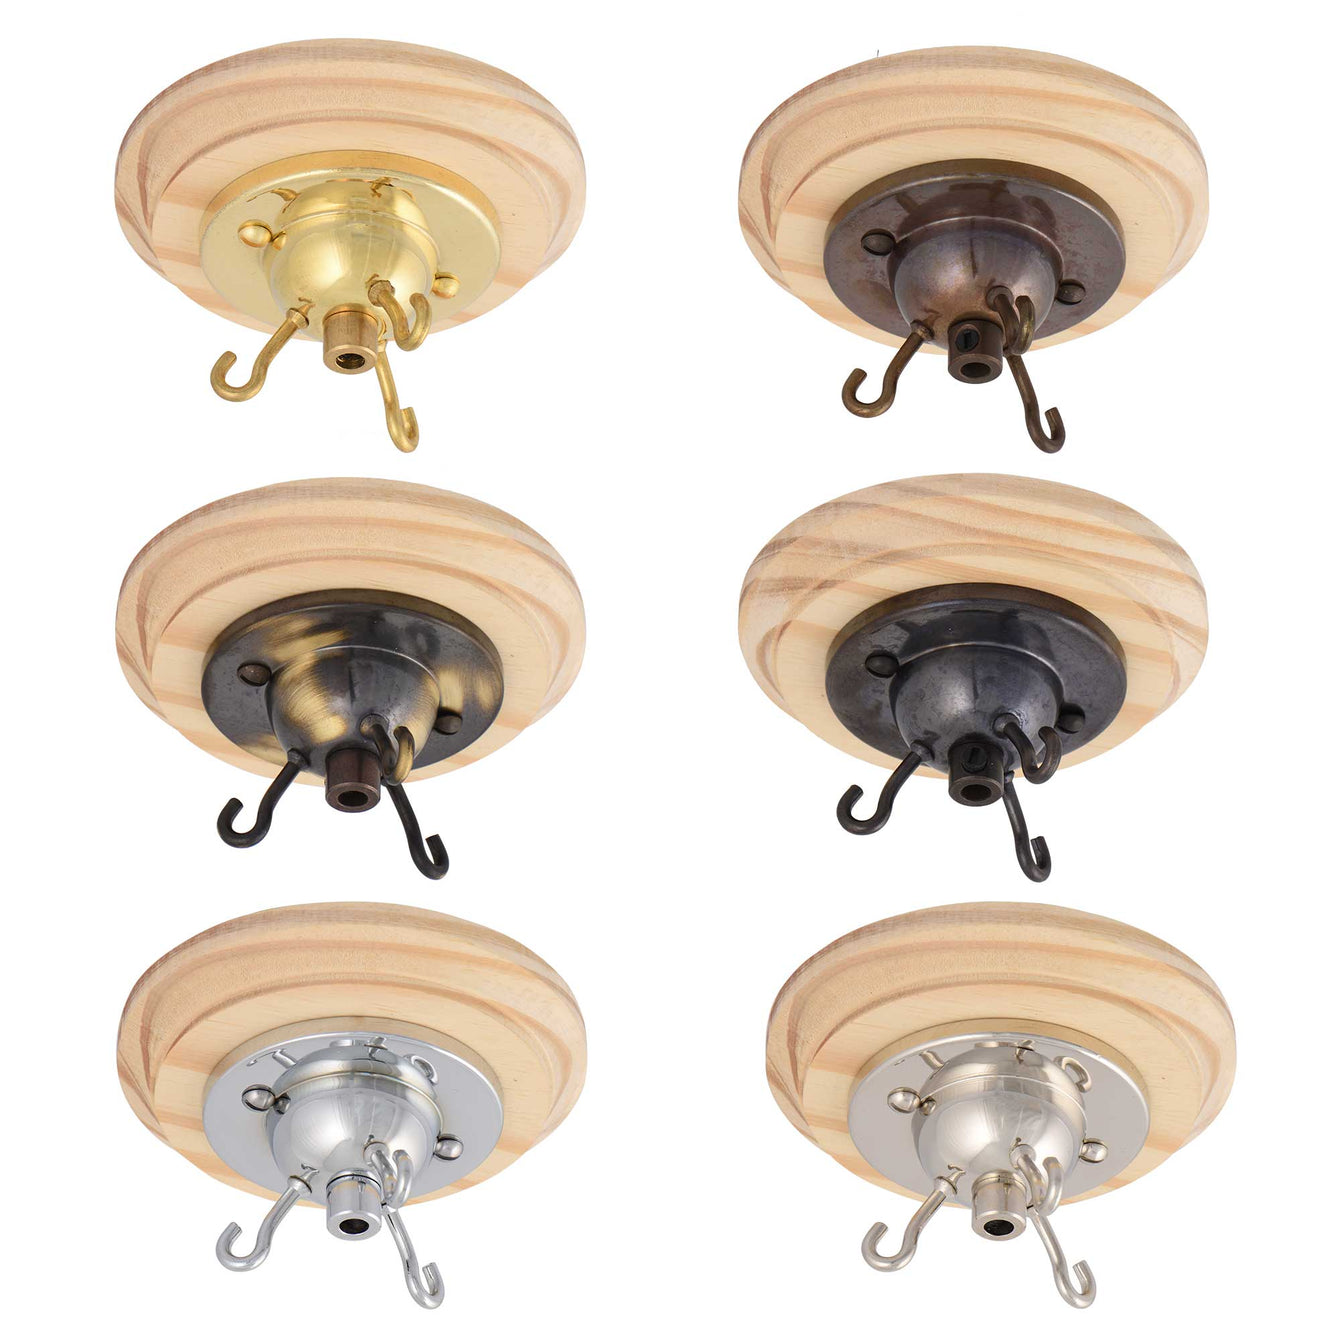 ElekTek 3 Hook Ceiling Rose Kit With Matching Screws Cord Grip and Pine Ceiling Pattress Metallic Finishes - Buy It Better Brass